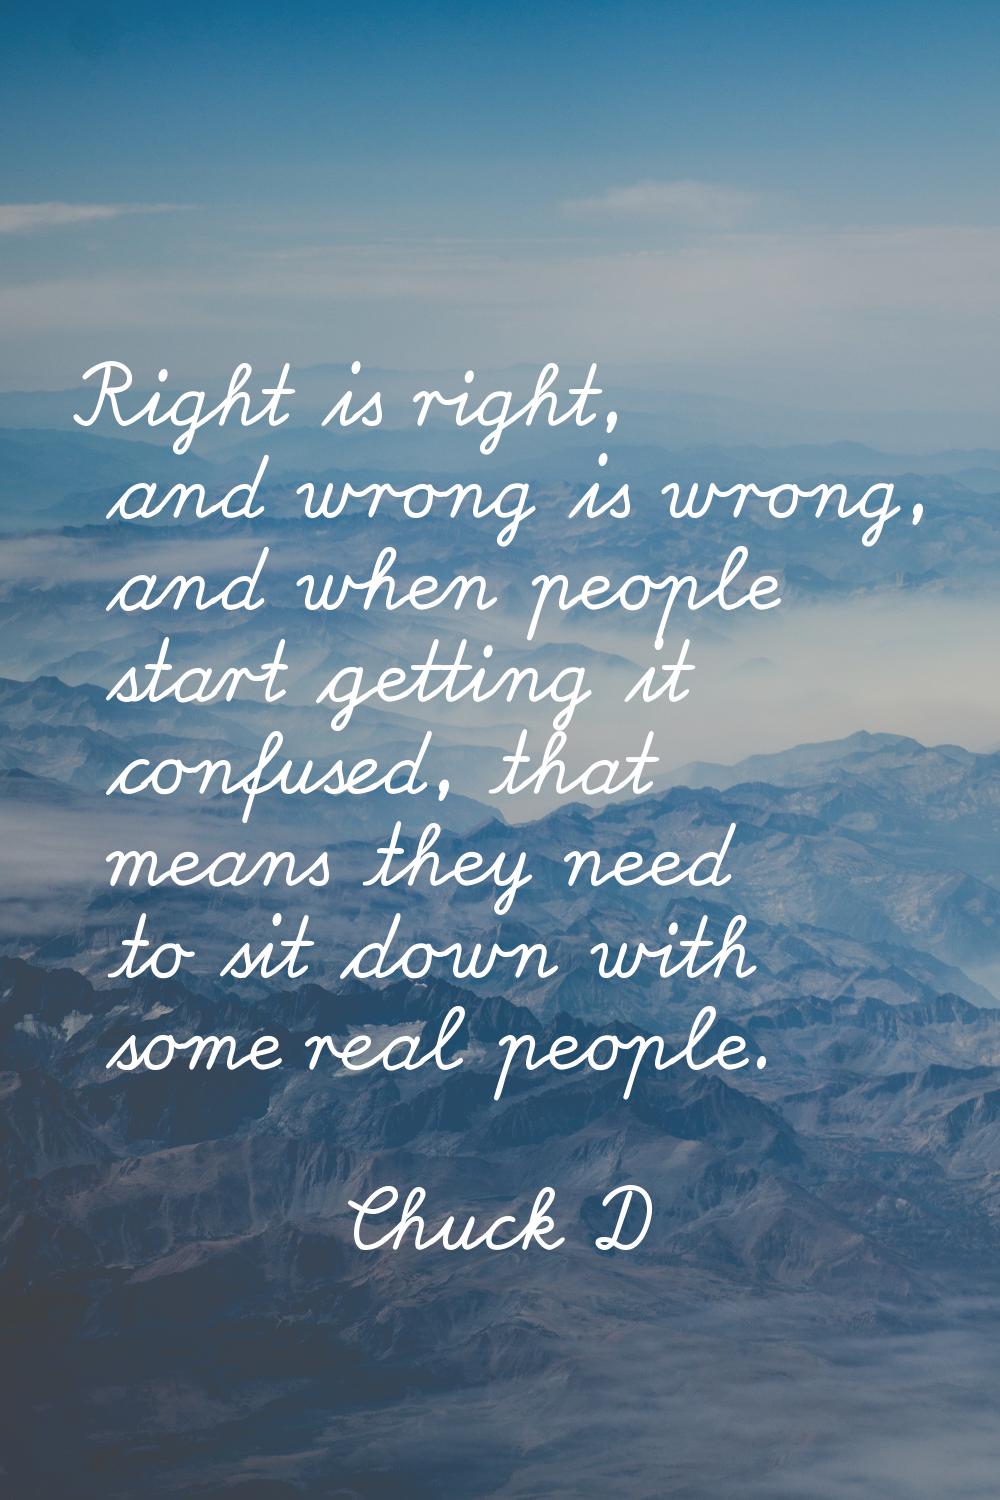 Right is right, and wrong is wrong, and when people start getting it confused, that means they need